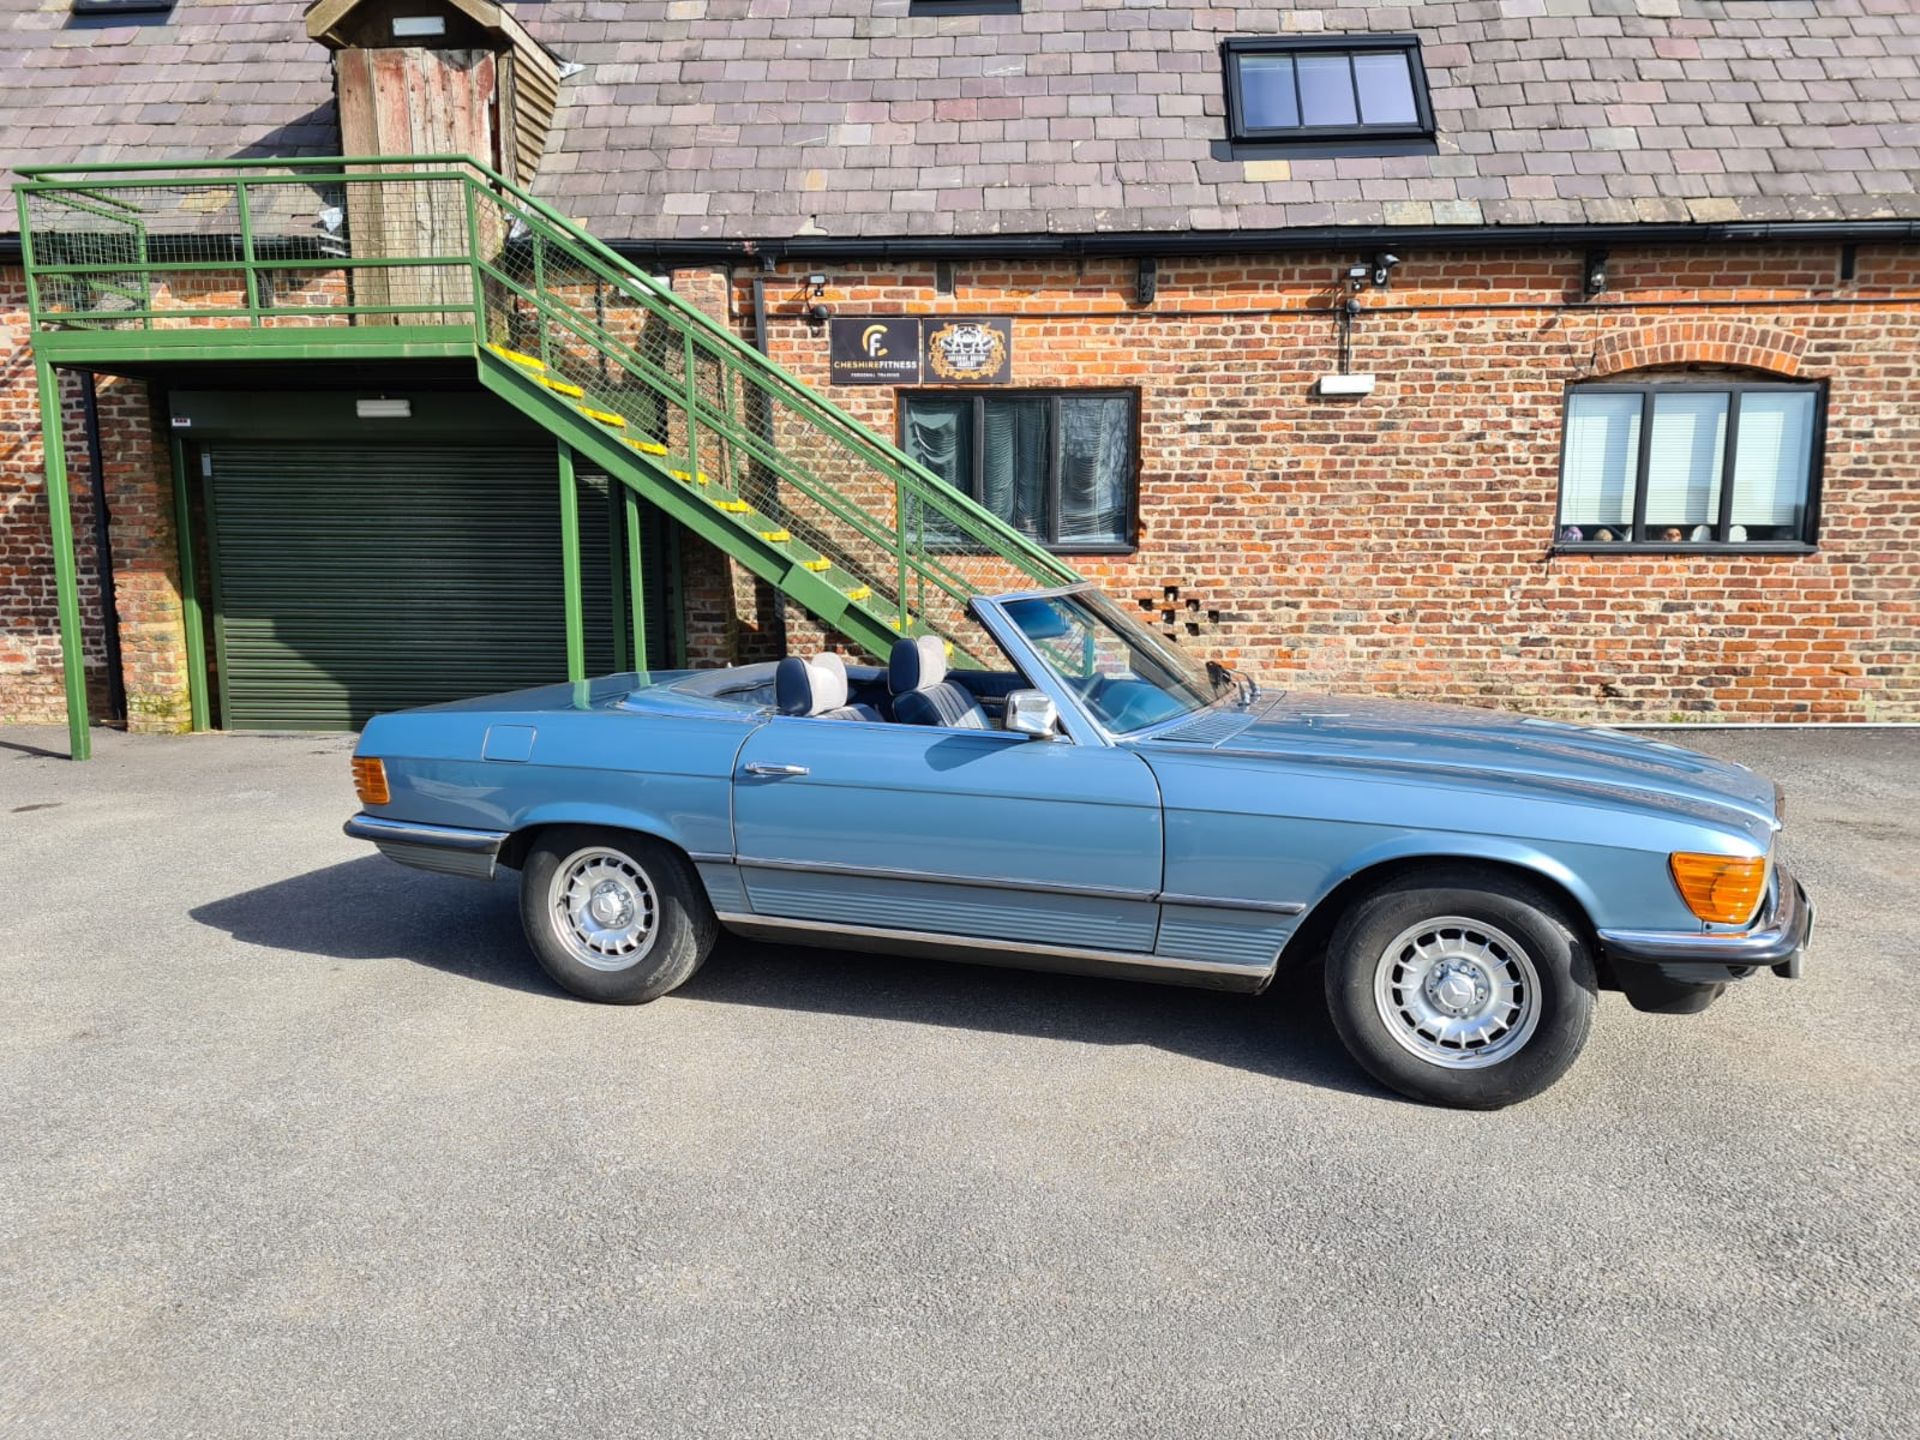 Stunning 1979 Mercedes Benz SL350 V8 With Factory Hardtop - Restored in 2018 - Image 14 of 22